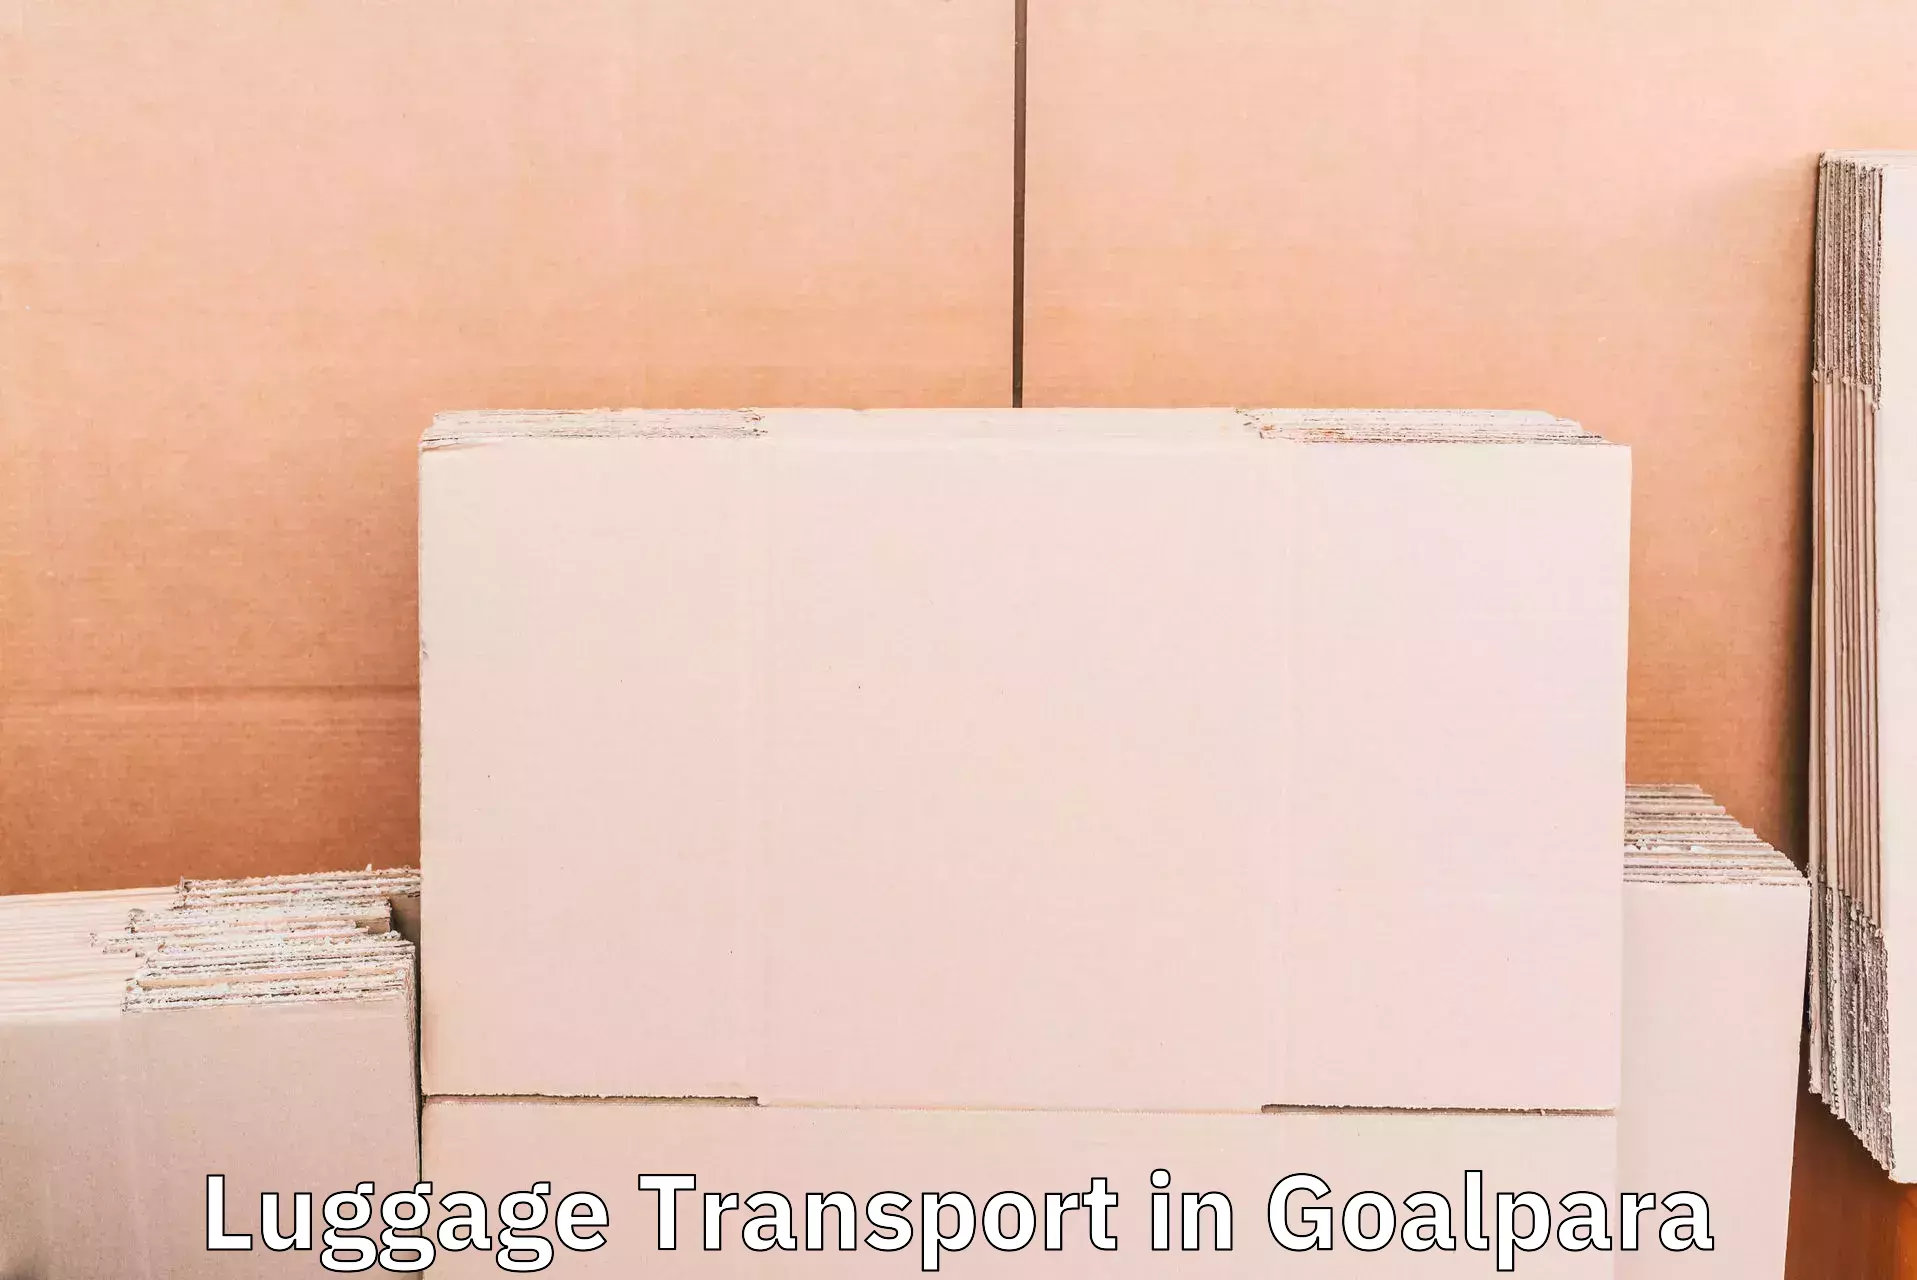 Luggage transport operations in Goalpara